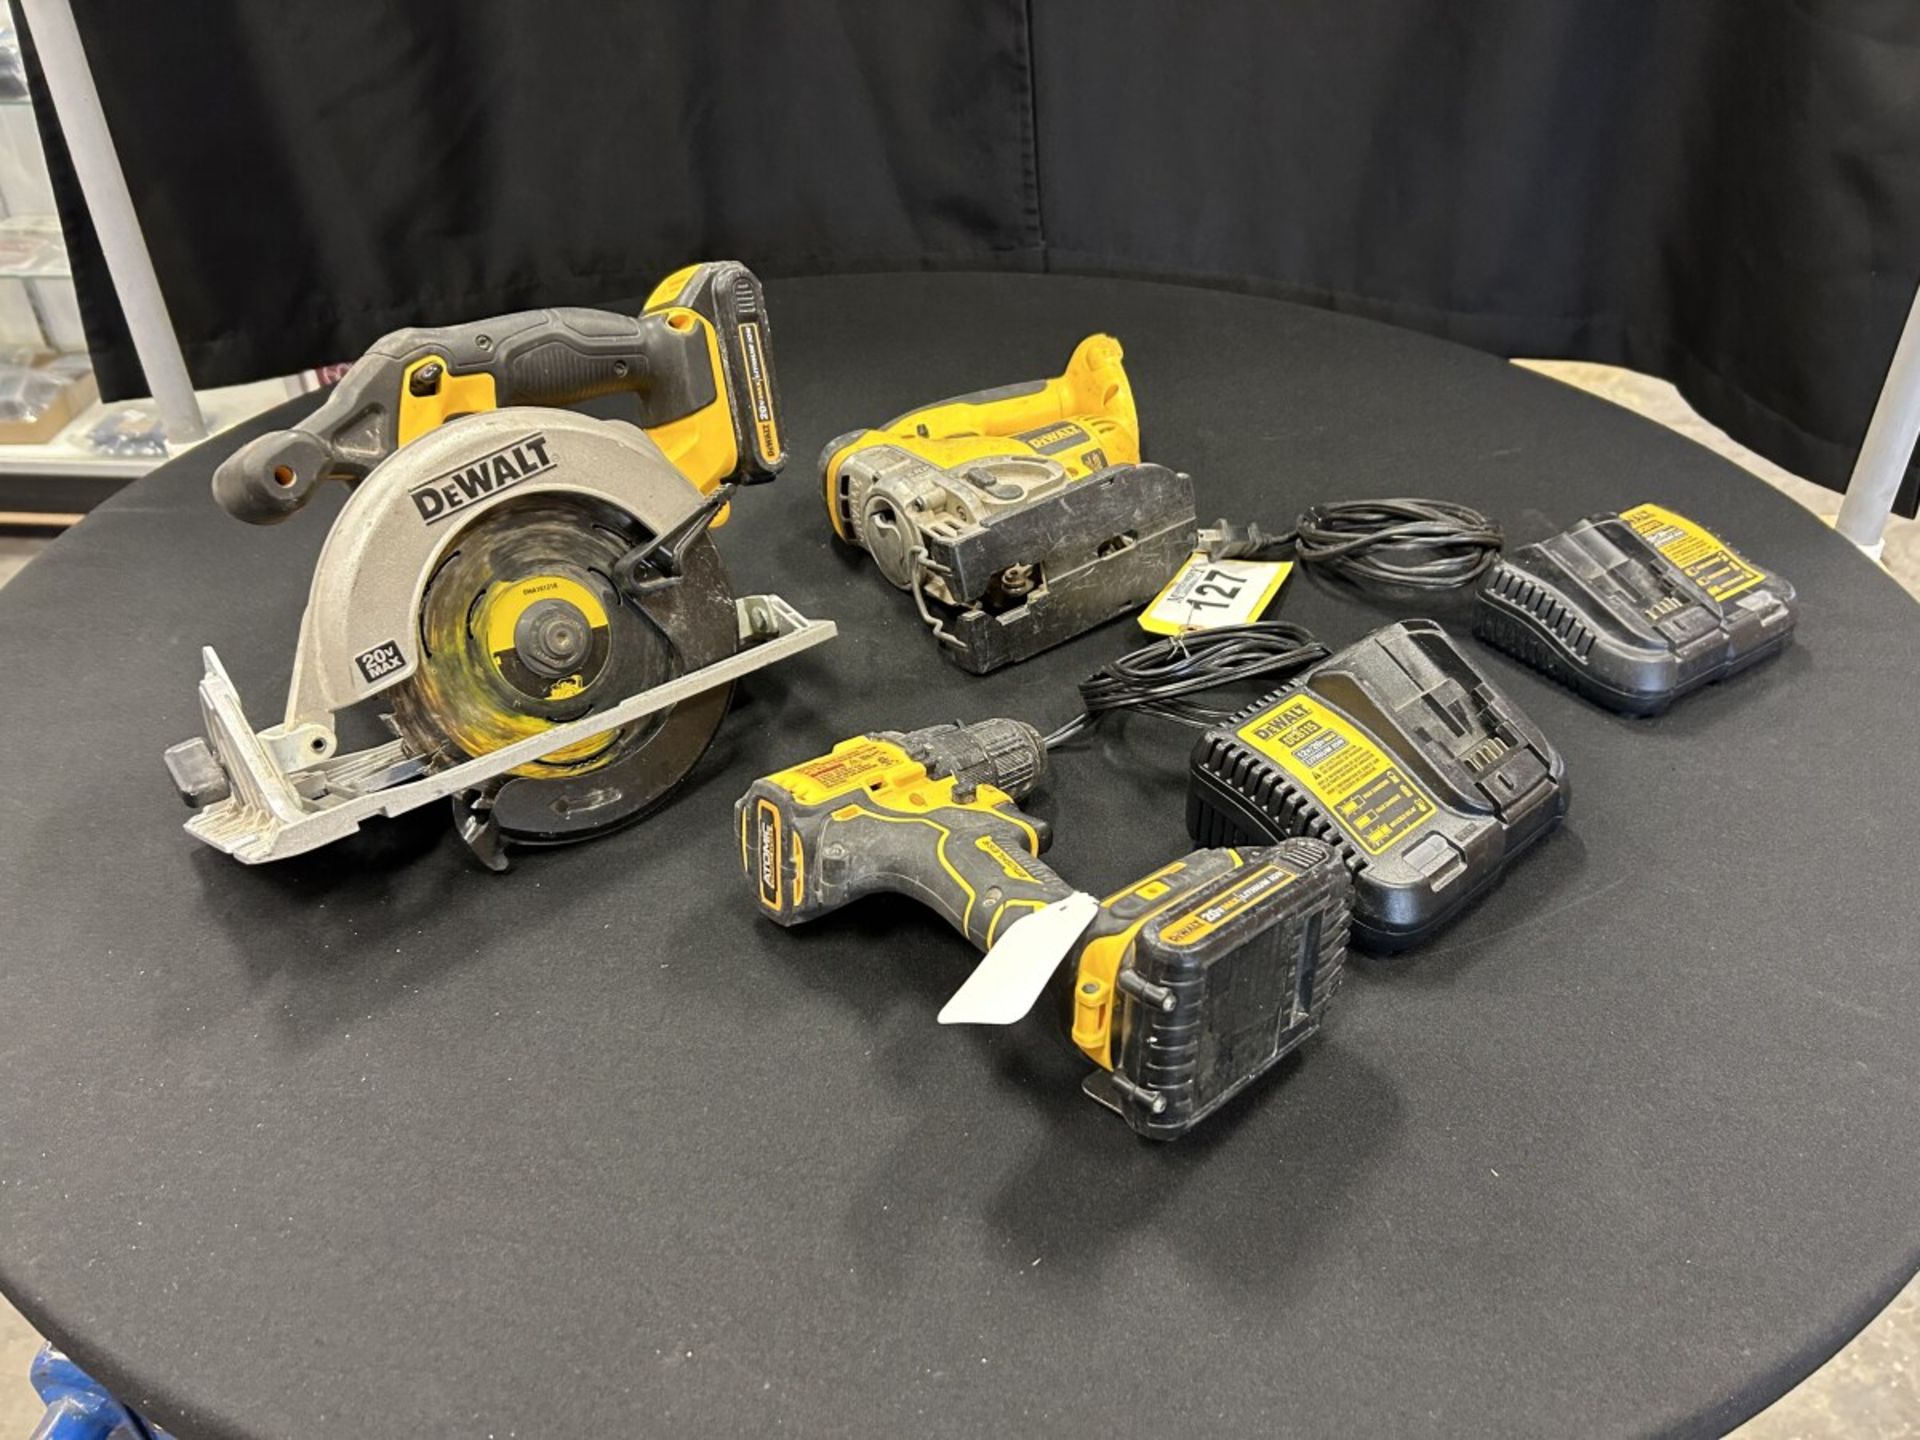 DEWALT CORDLESS JIG SAW, CIRCULAR SAW, DRILL, 2 BATTERIES AND 2 CHARGERS - B40 - Image 2 of 14